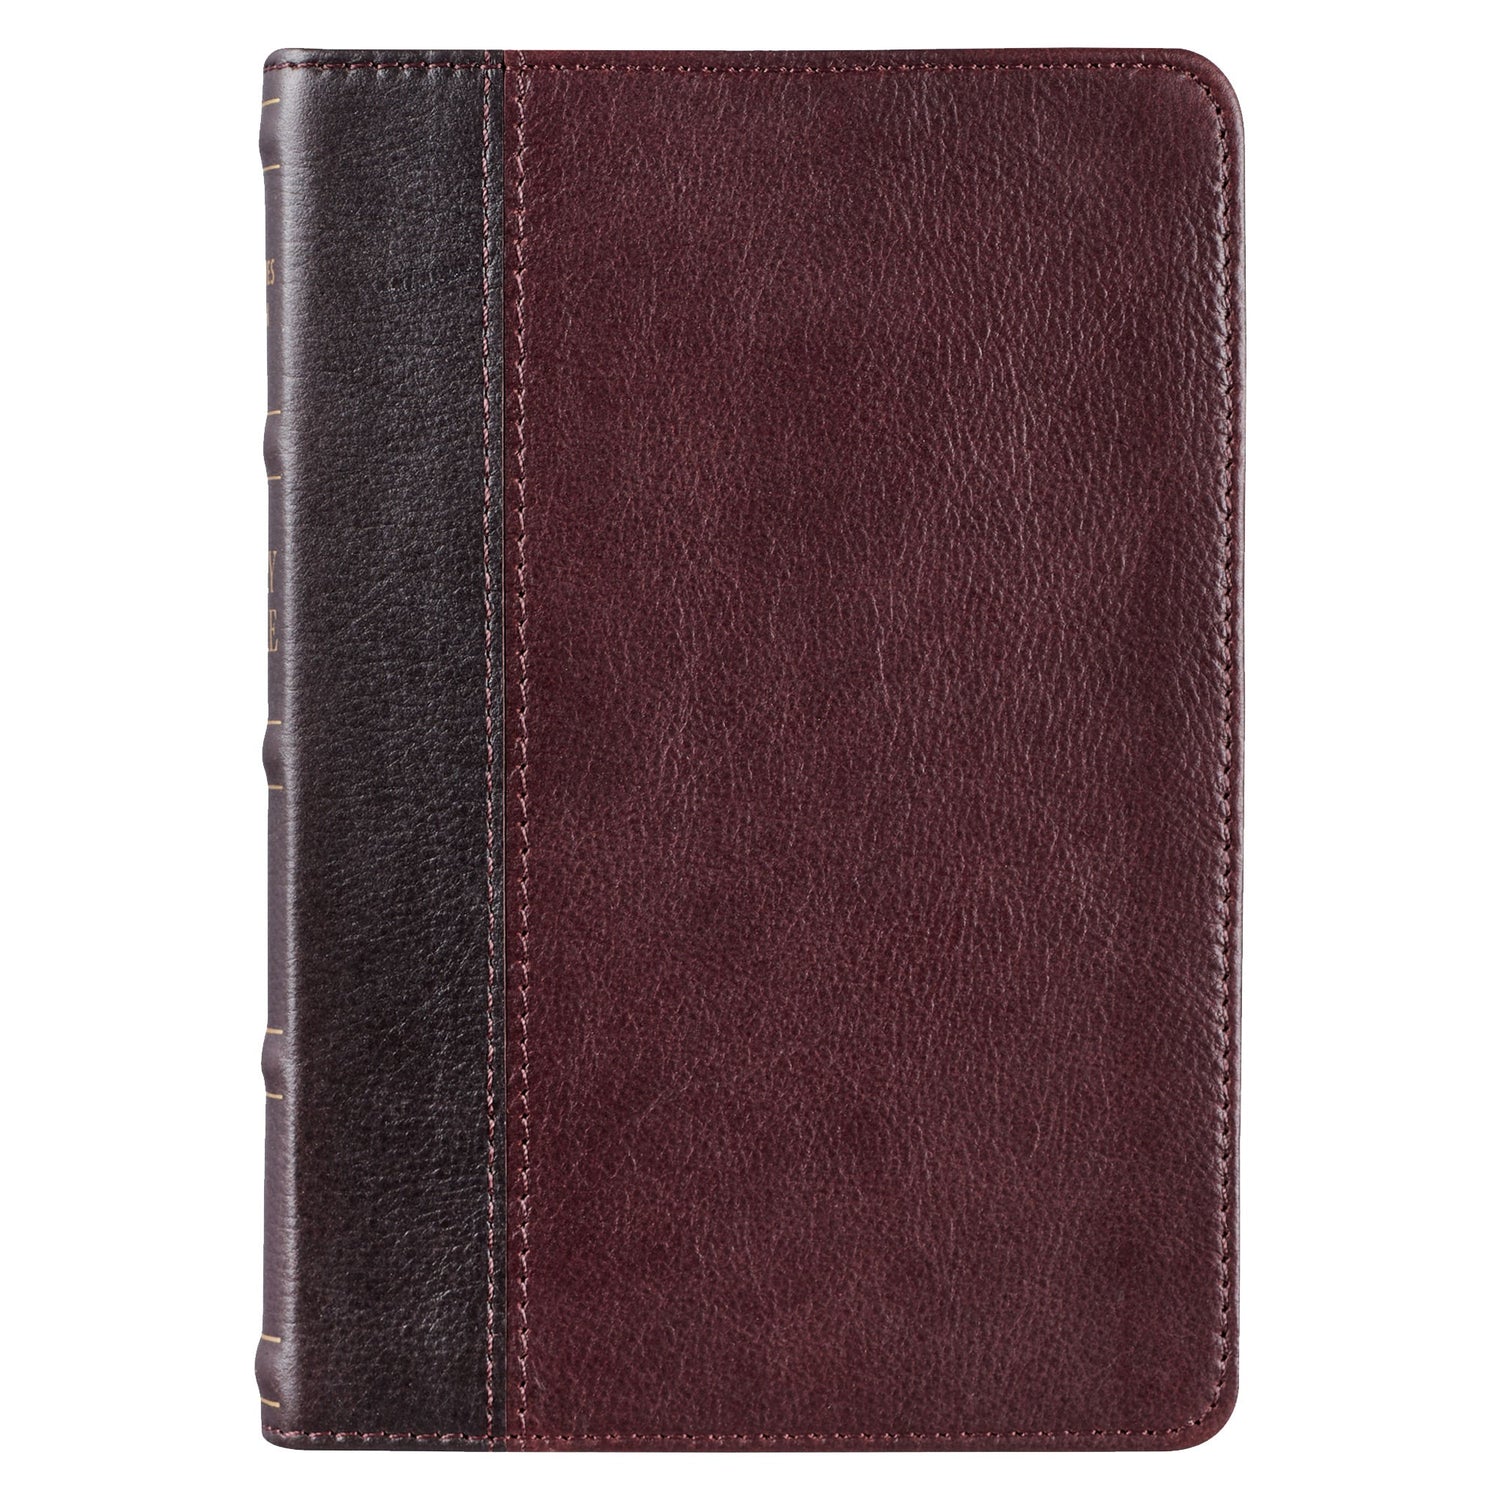 Seed of Abraham Christian Bookstore - (In)Courage - KJV Compact Bible-Merlot/Burgundy Genuine Leather